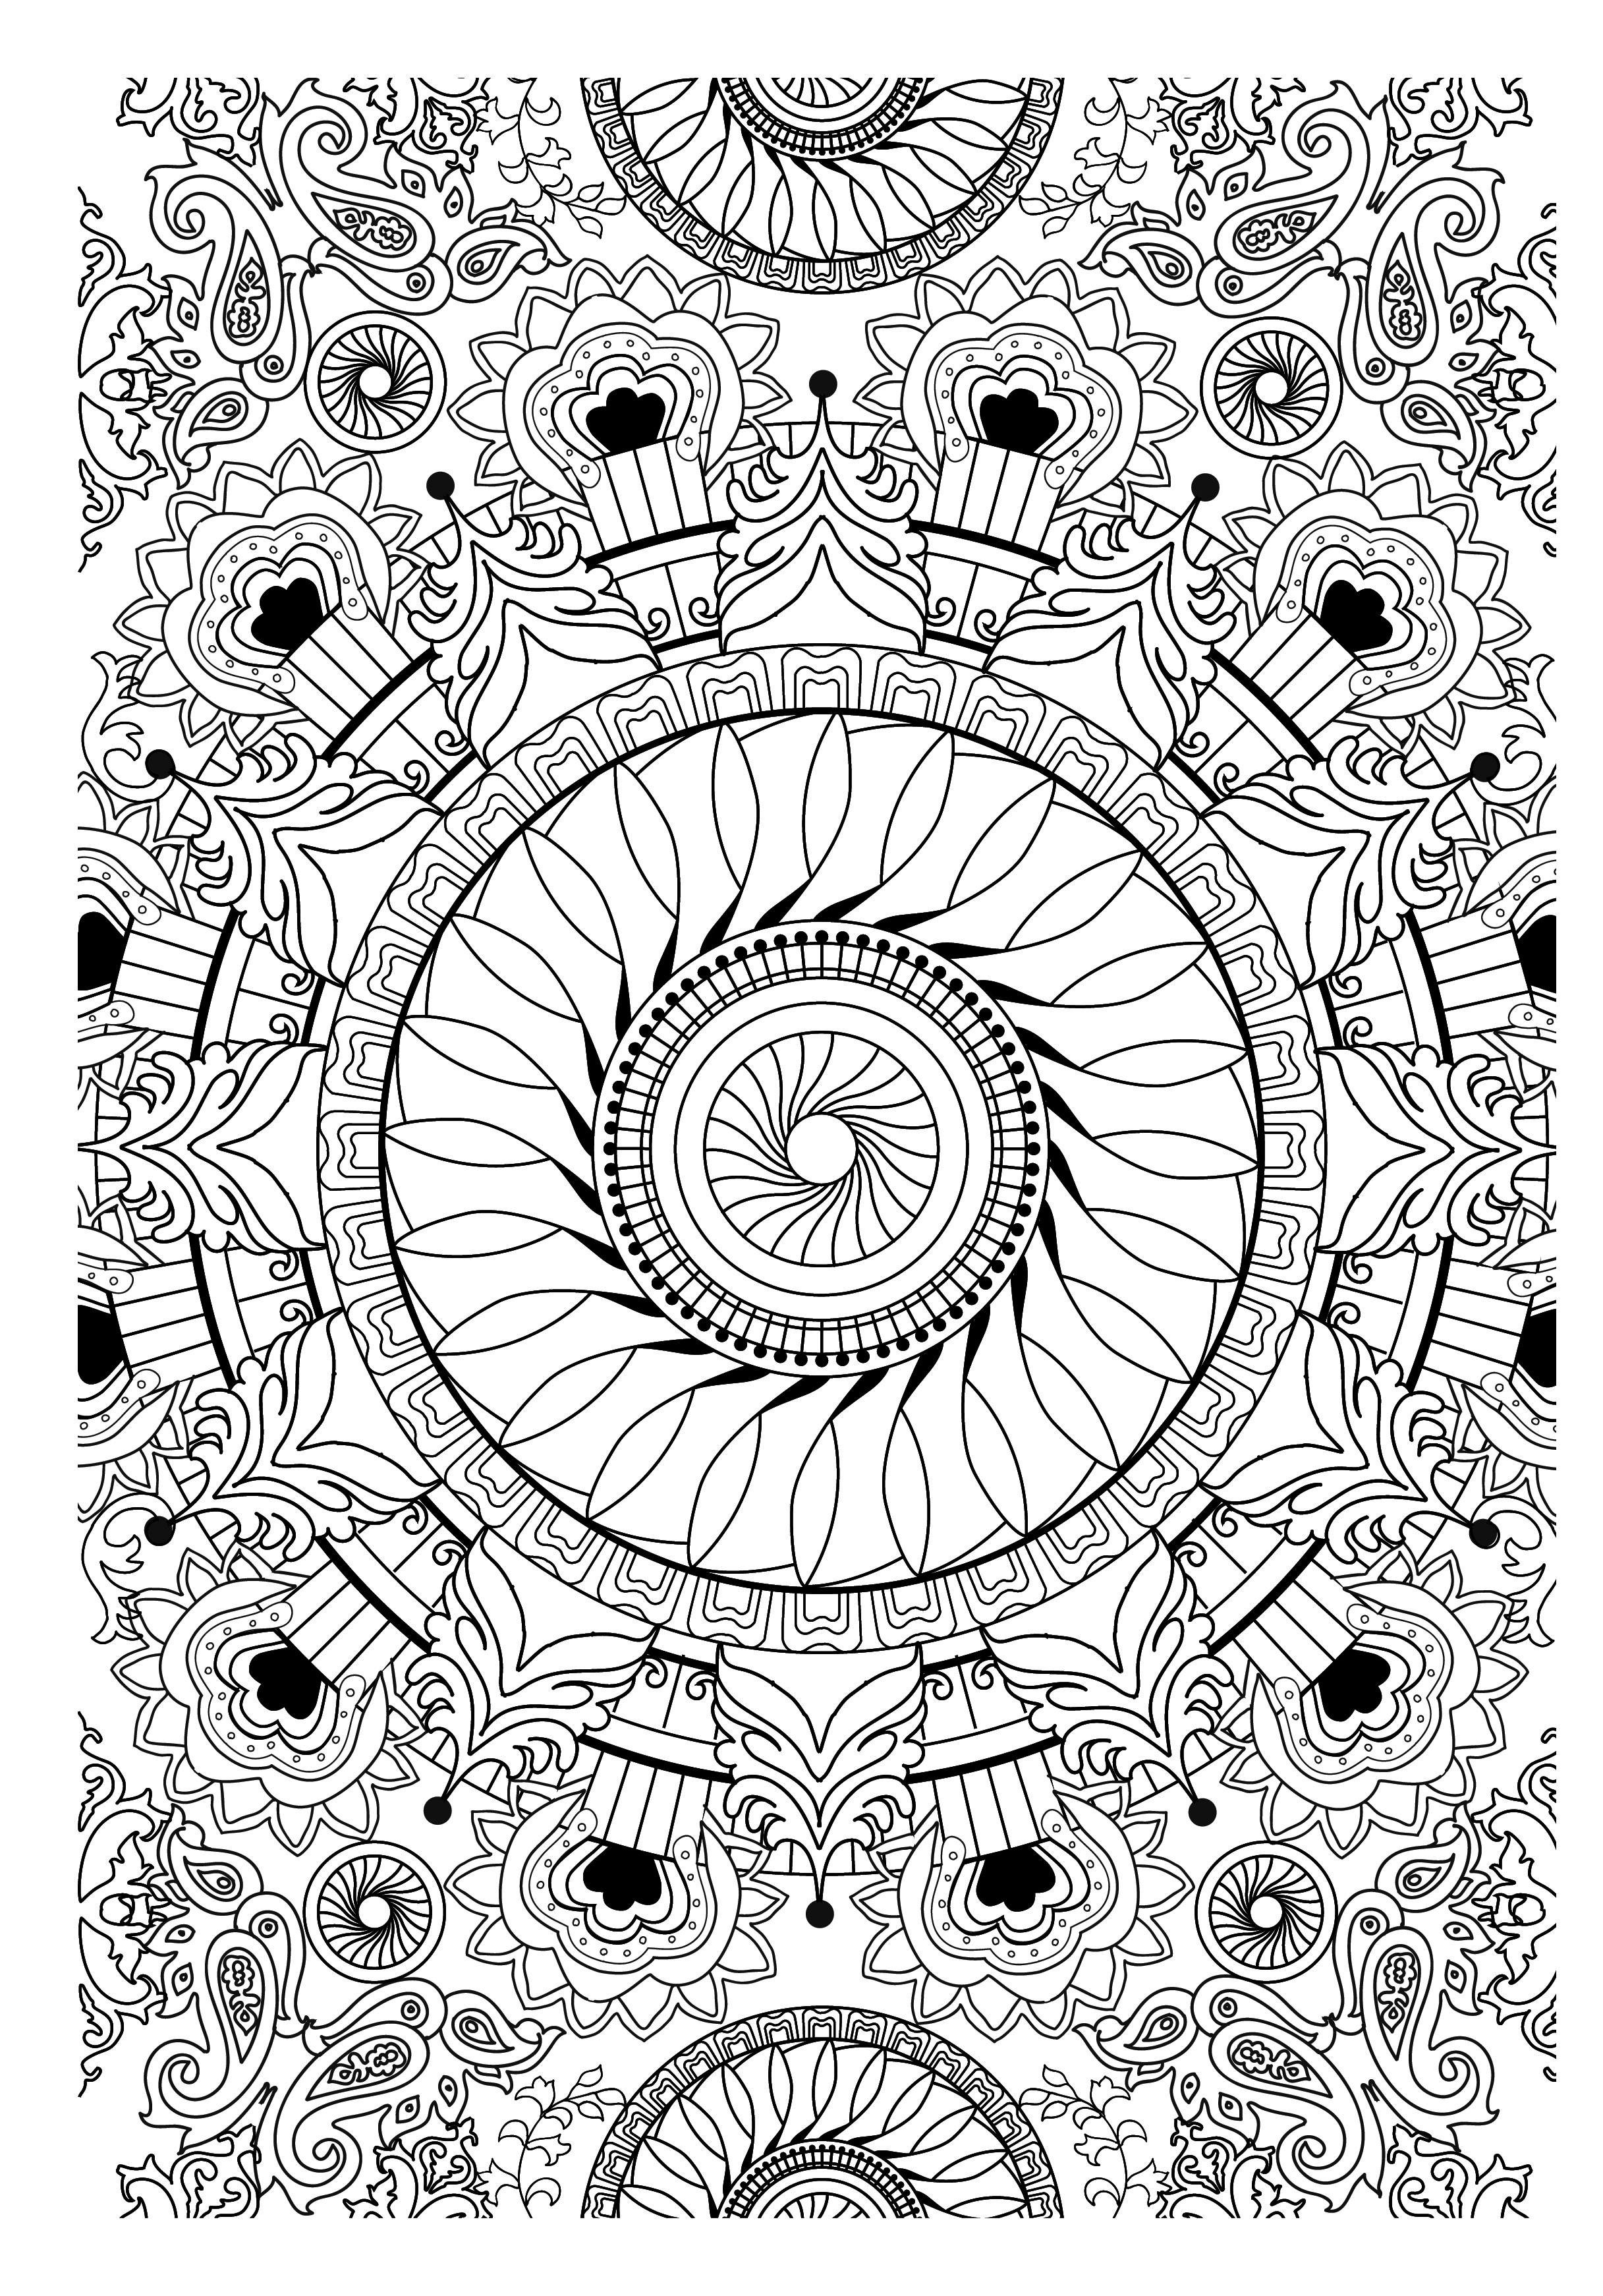 Drawing Art Therapy #23097 (Relaxation) – Printable coloring pages